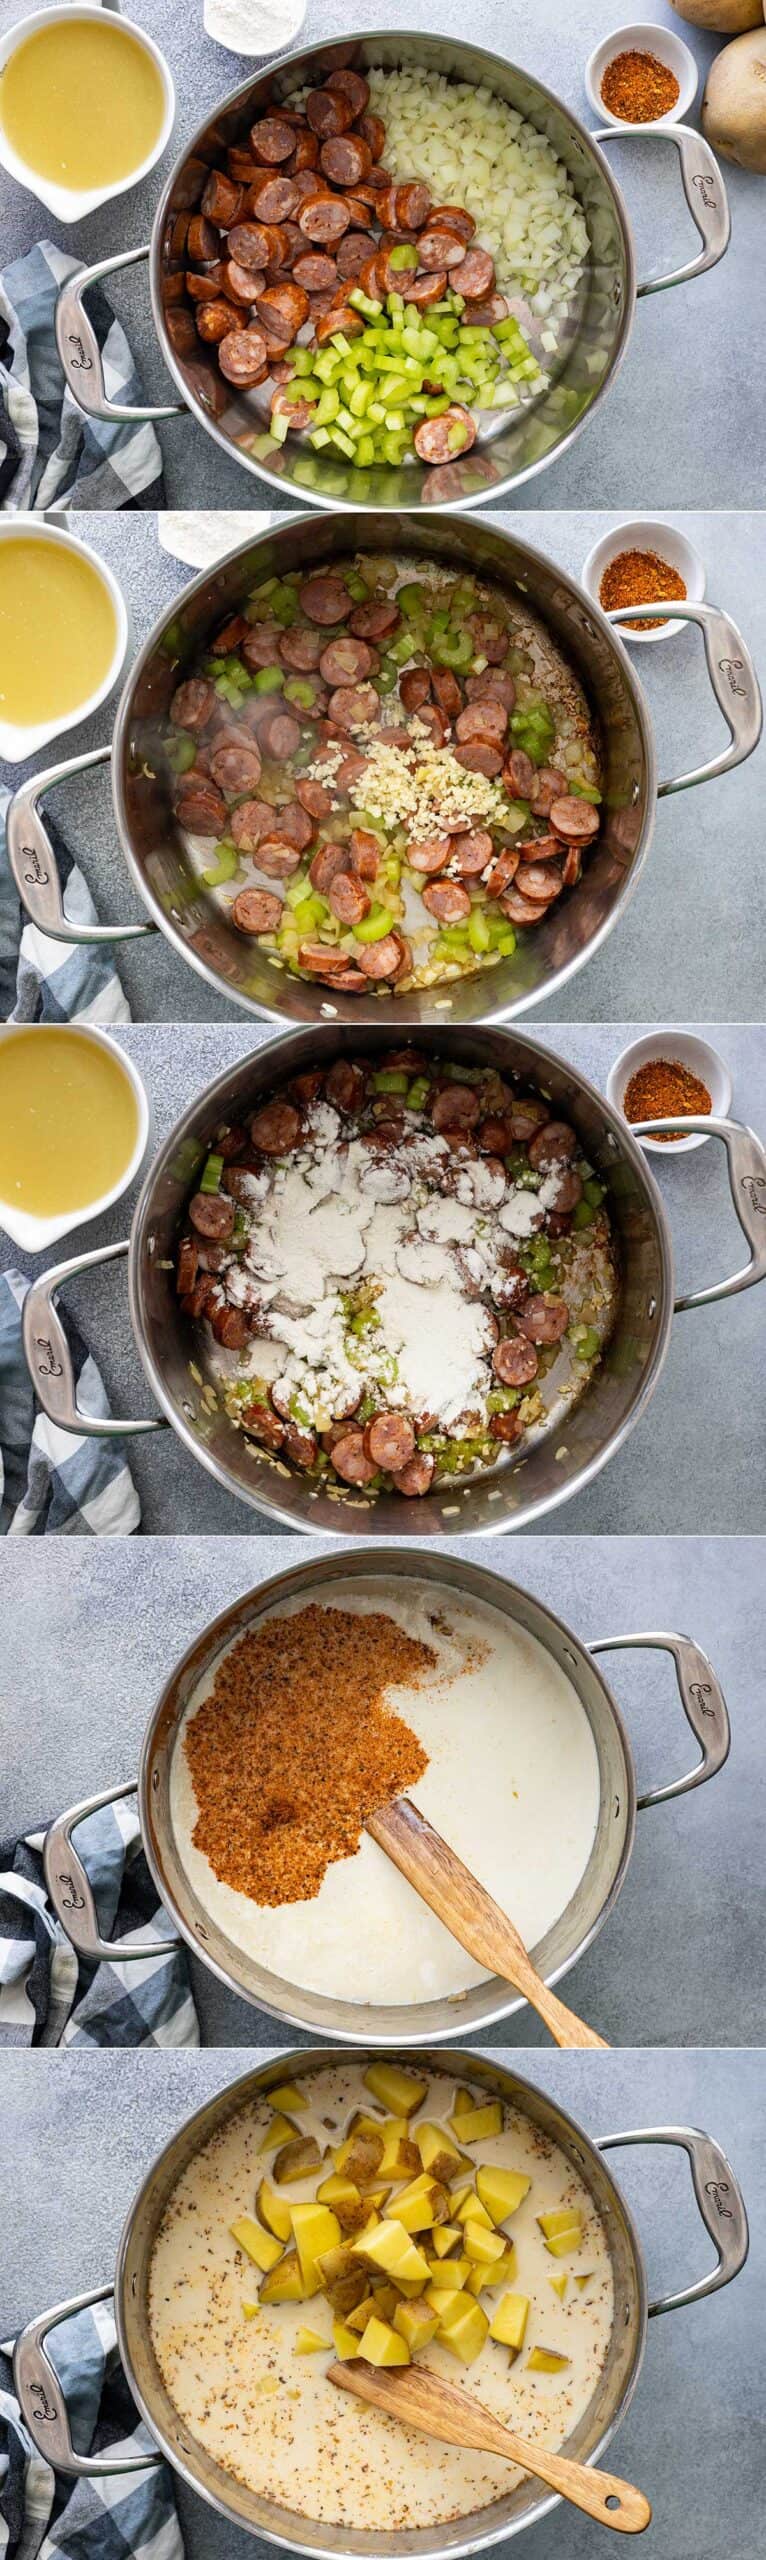 Five pictures showing how to make the soup. Sautéing the vegetables and sausage, adding the garlic, stirring in the flour, stirring in the broth, milk, cream, and seasoning, and then adding in the potatoes.